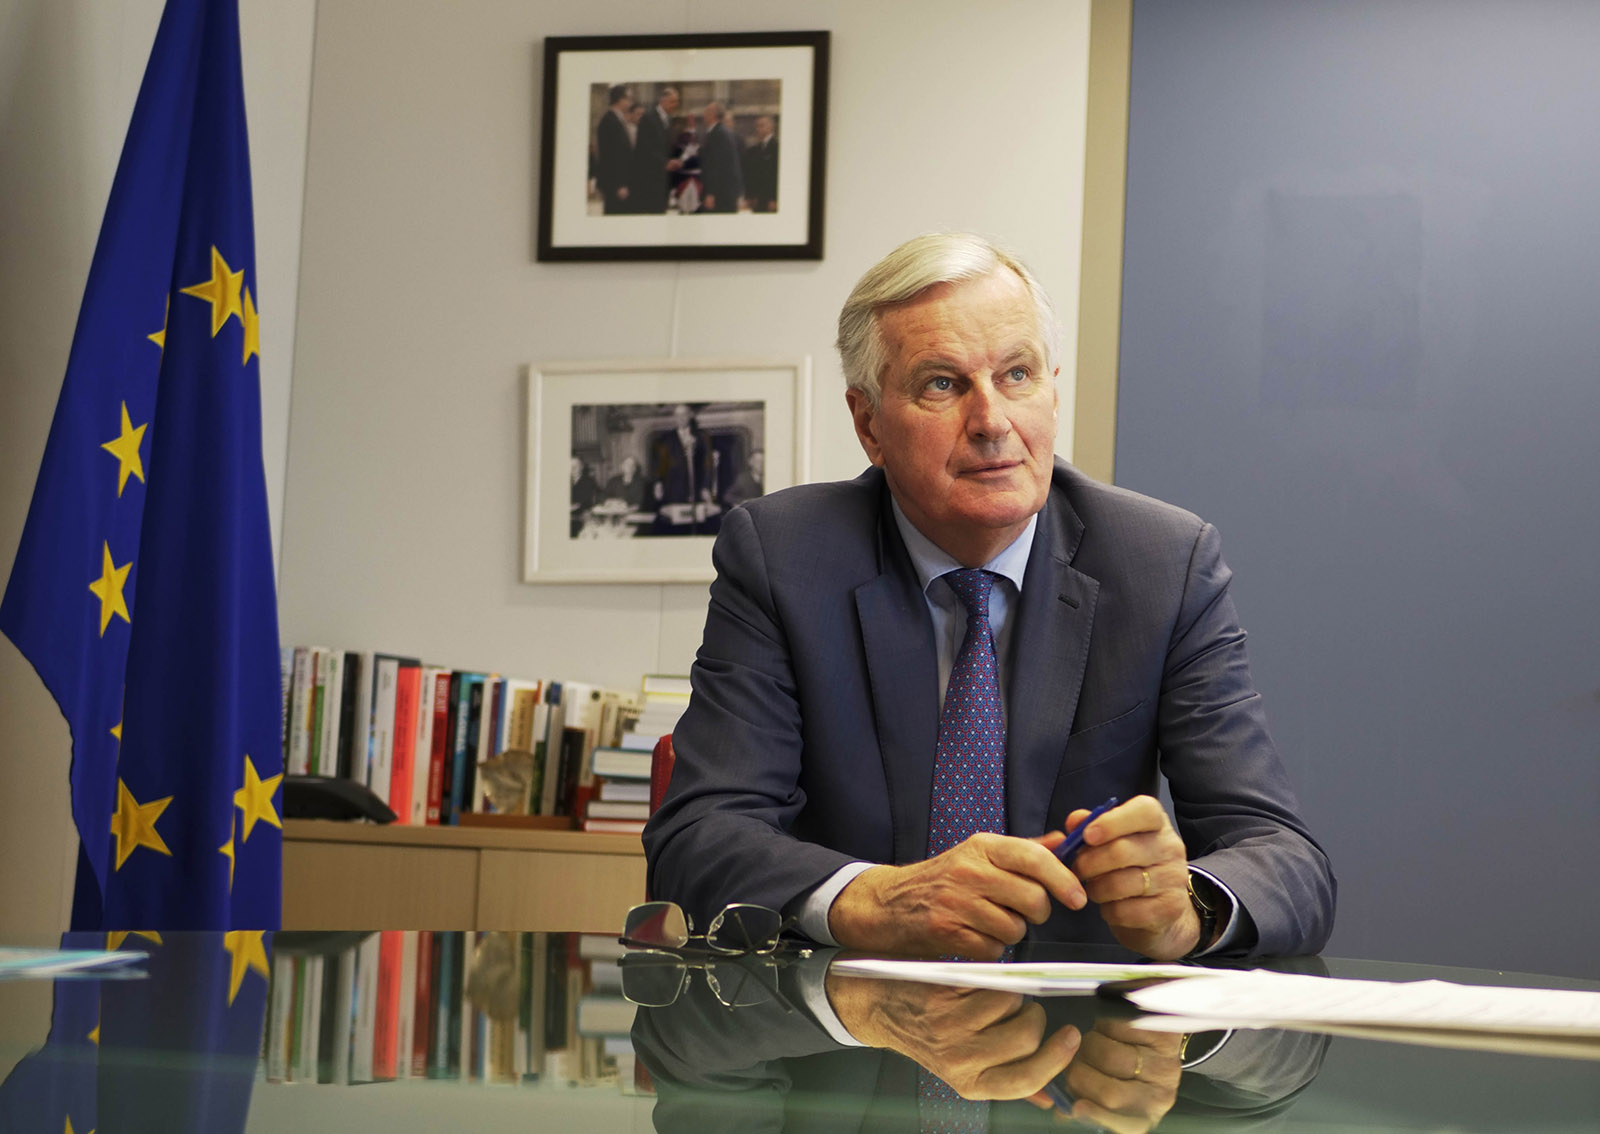 An Interview with Michel Barnier